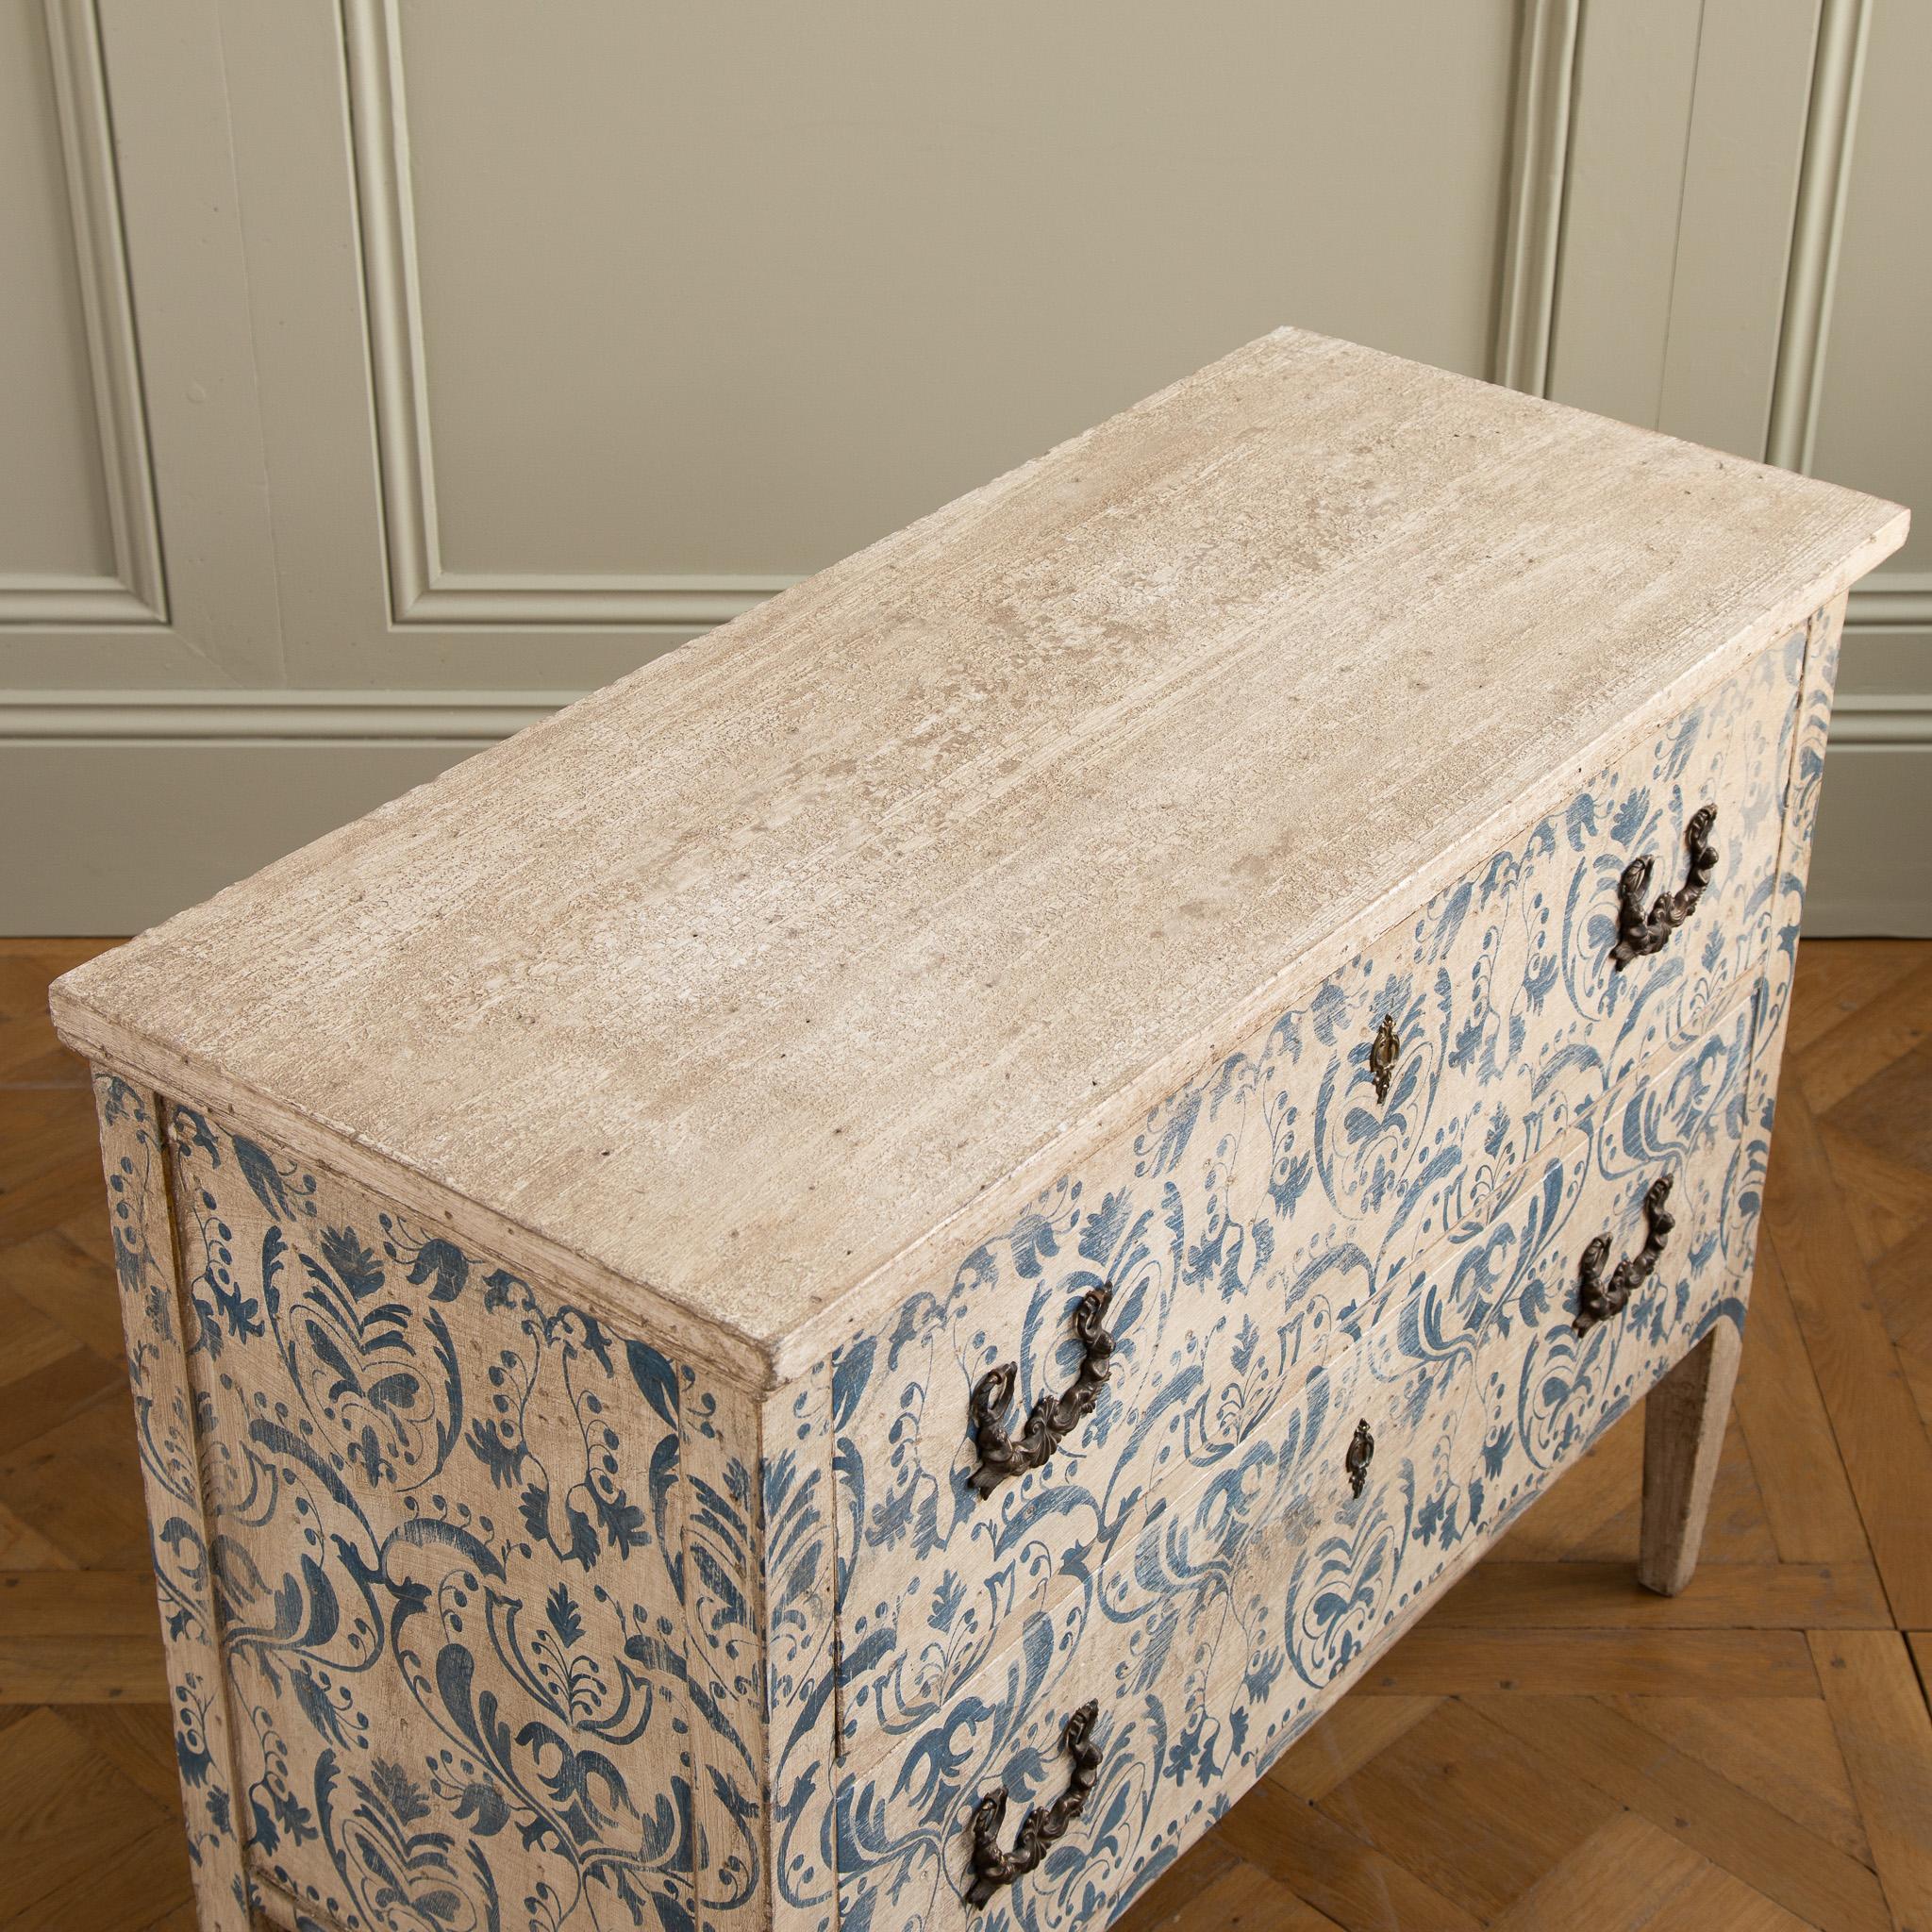 Blue & White Florentine Style Hand Painted Italian Chest Of Drawers/Commode In Good Condition For Sale In London, Park Royal